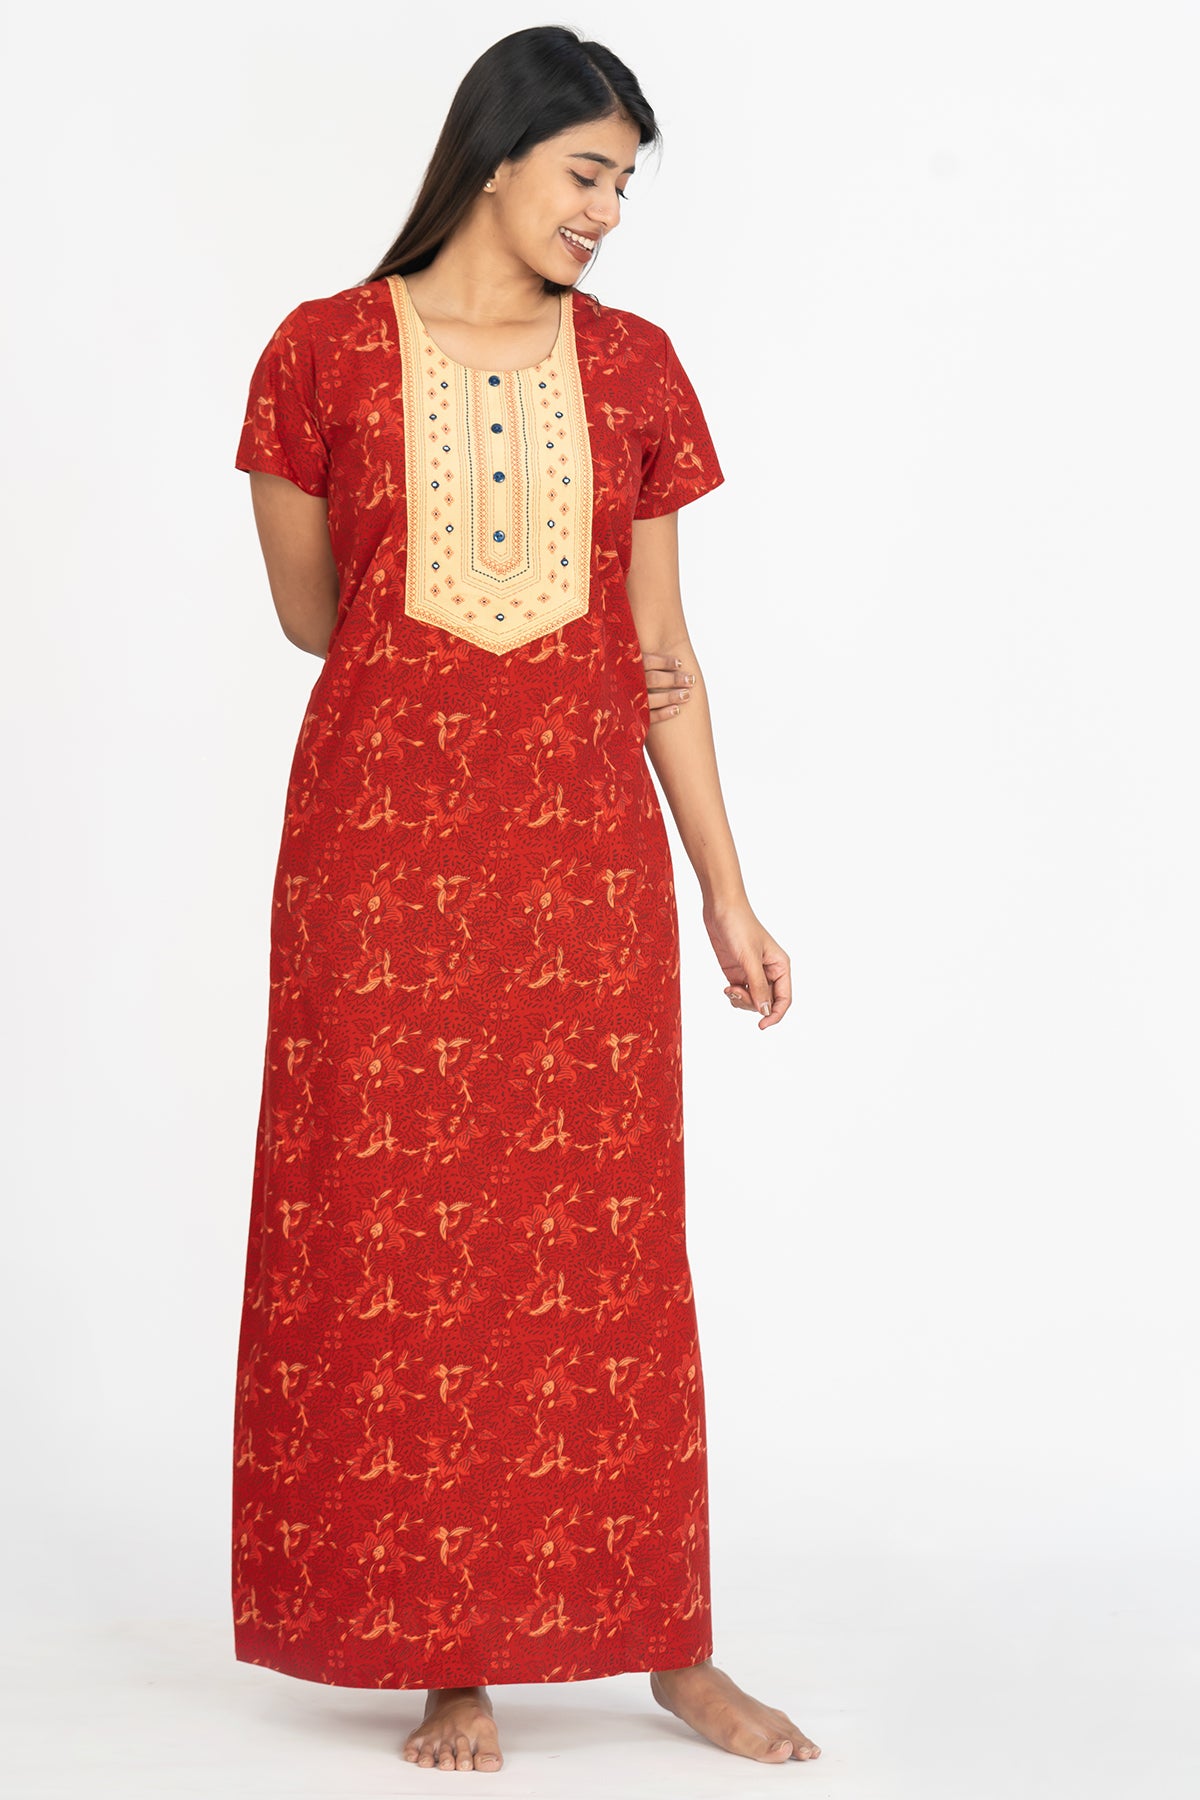 All Over Floral Abstract Printed With Contrast Yoke Nighty - Red